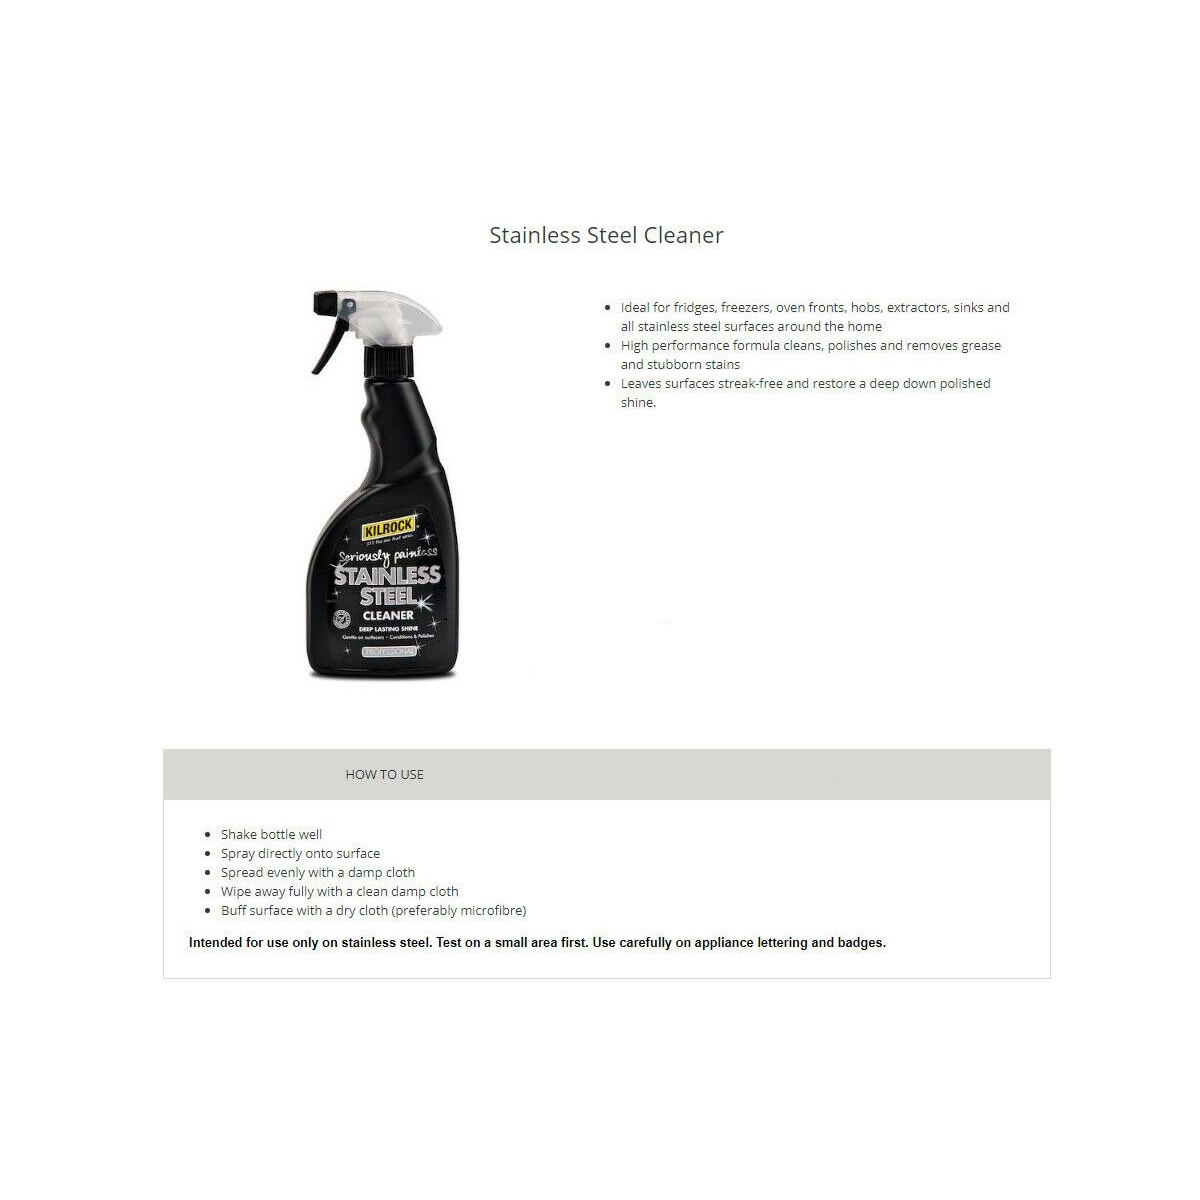 Where to Buy Kilrock Stainless Steel Cleaner